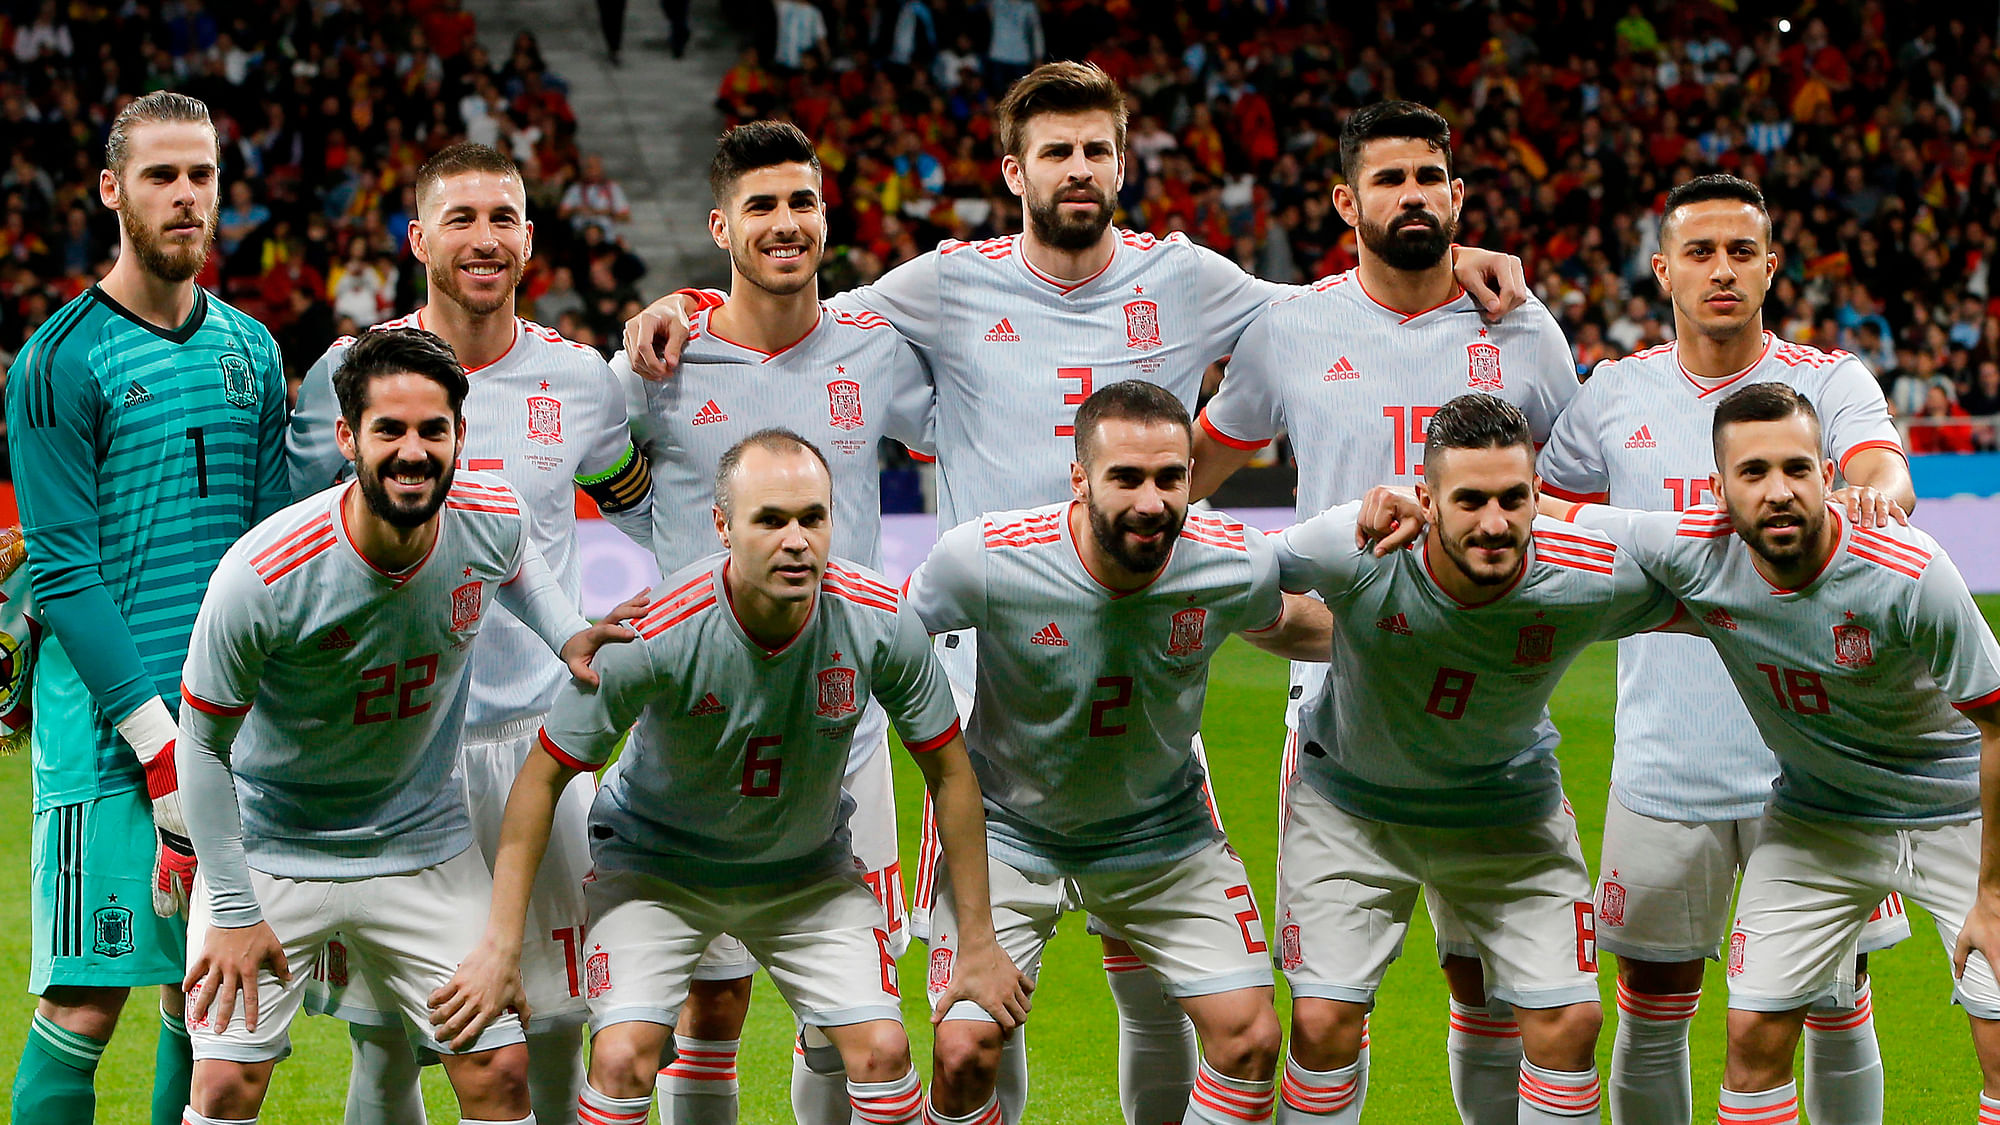 FILE - In this Tuesday, March 27, 2018 file photo, Spain’s team poses for a team photo prior the international friendly soccer match between Spain and Argentina at the Wanda Metropolitano stadium in Madrid.&nbsp;